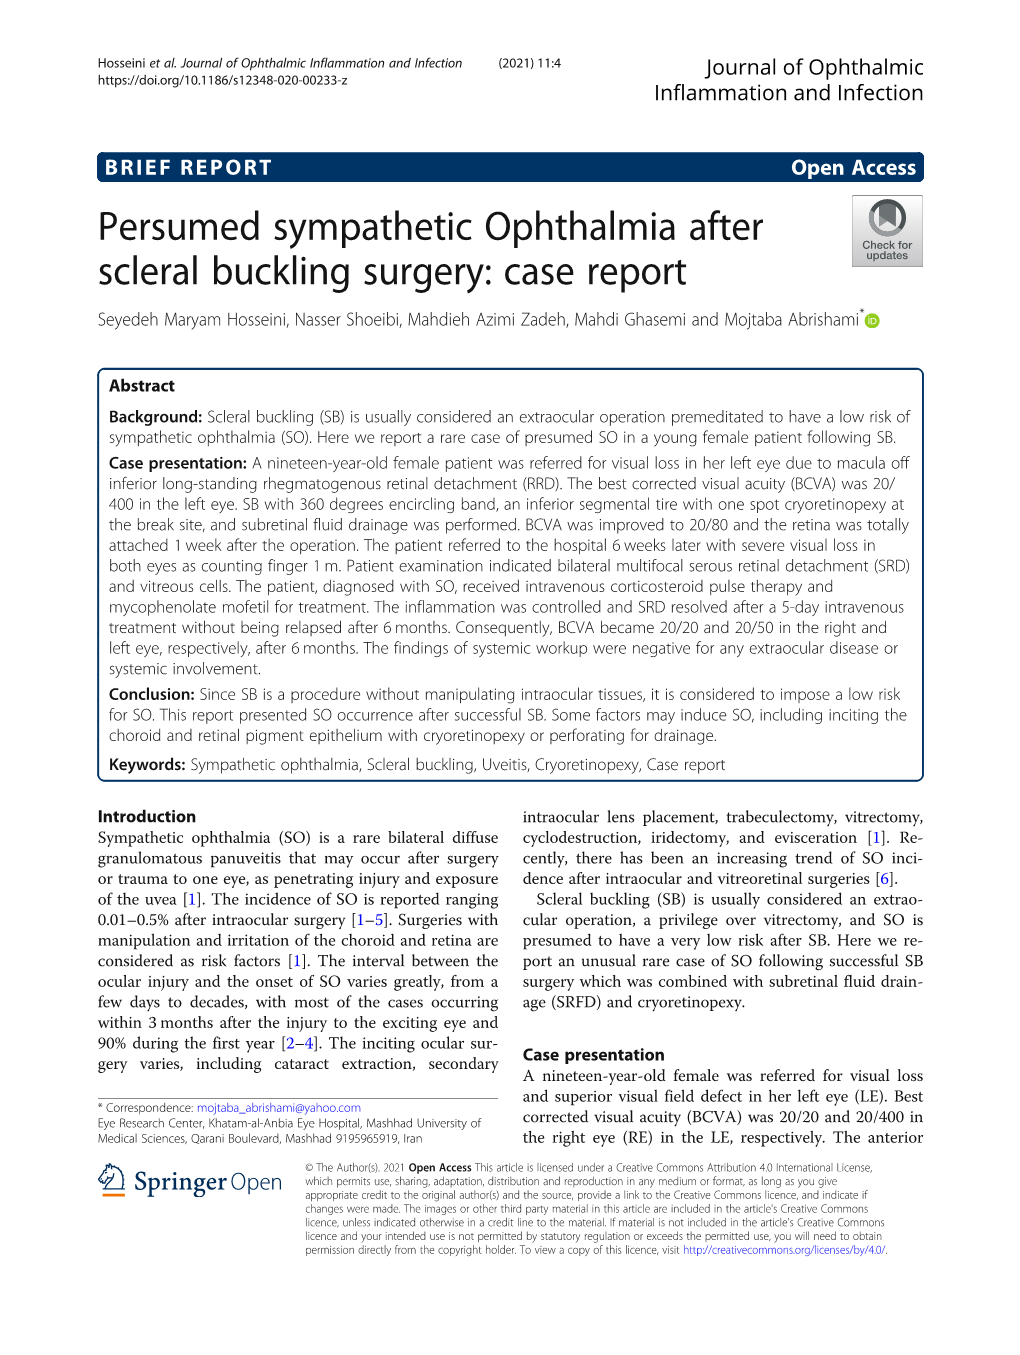 Persumed Sympathetic Ophthalmia After Scleral Buckling Surgery